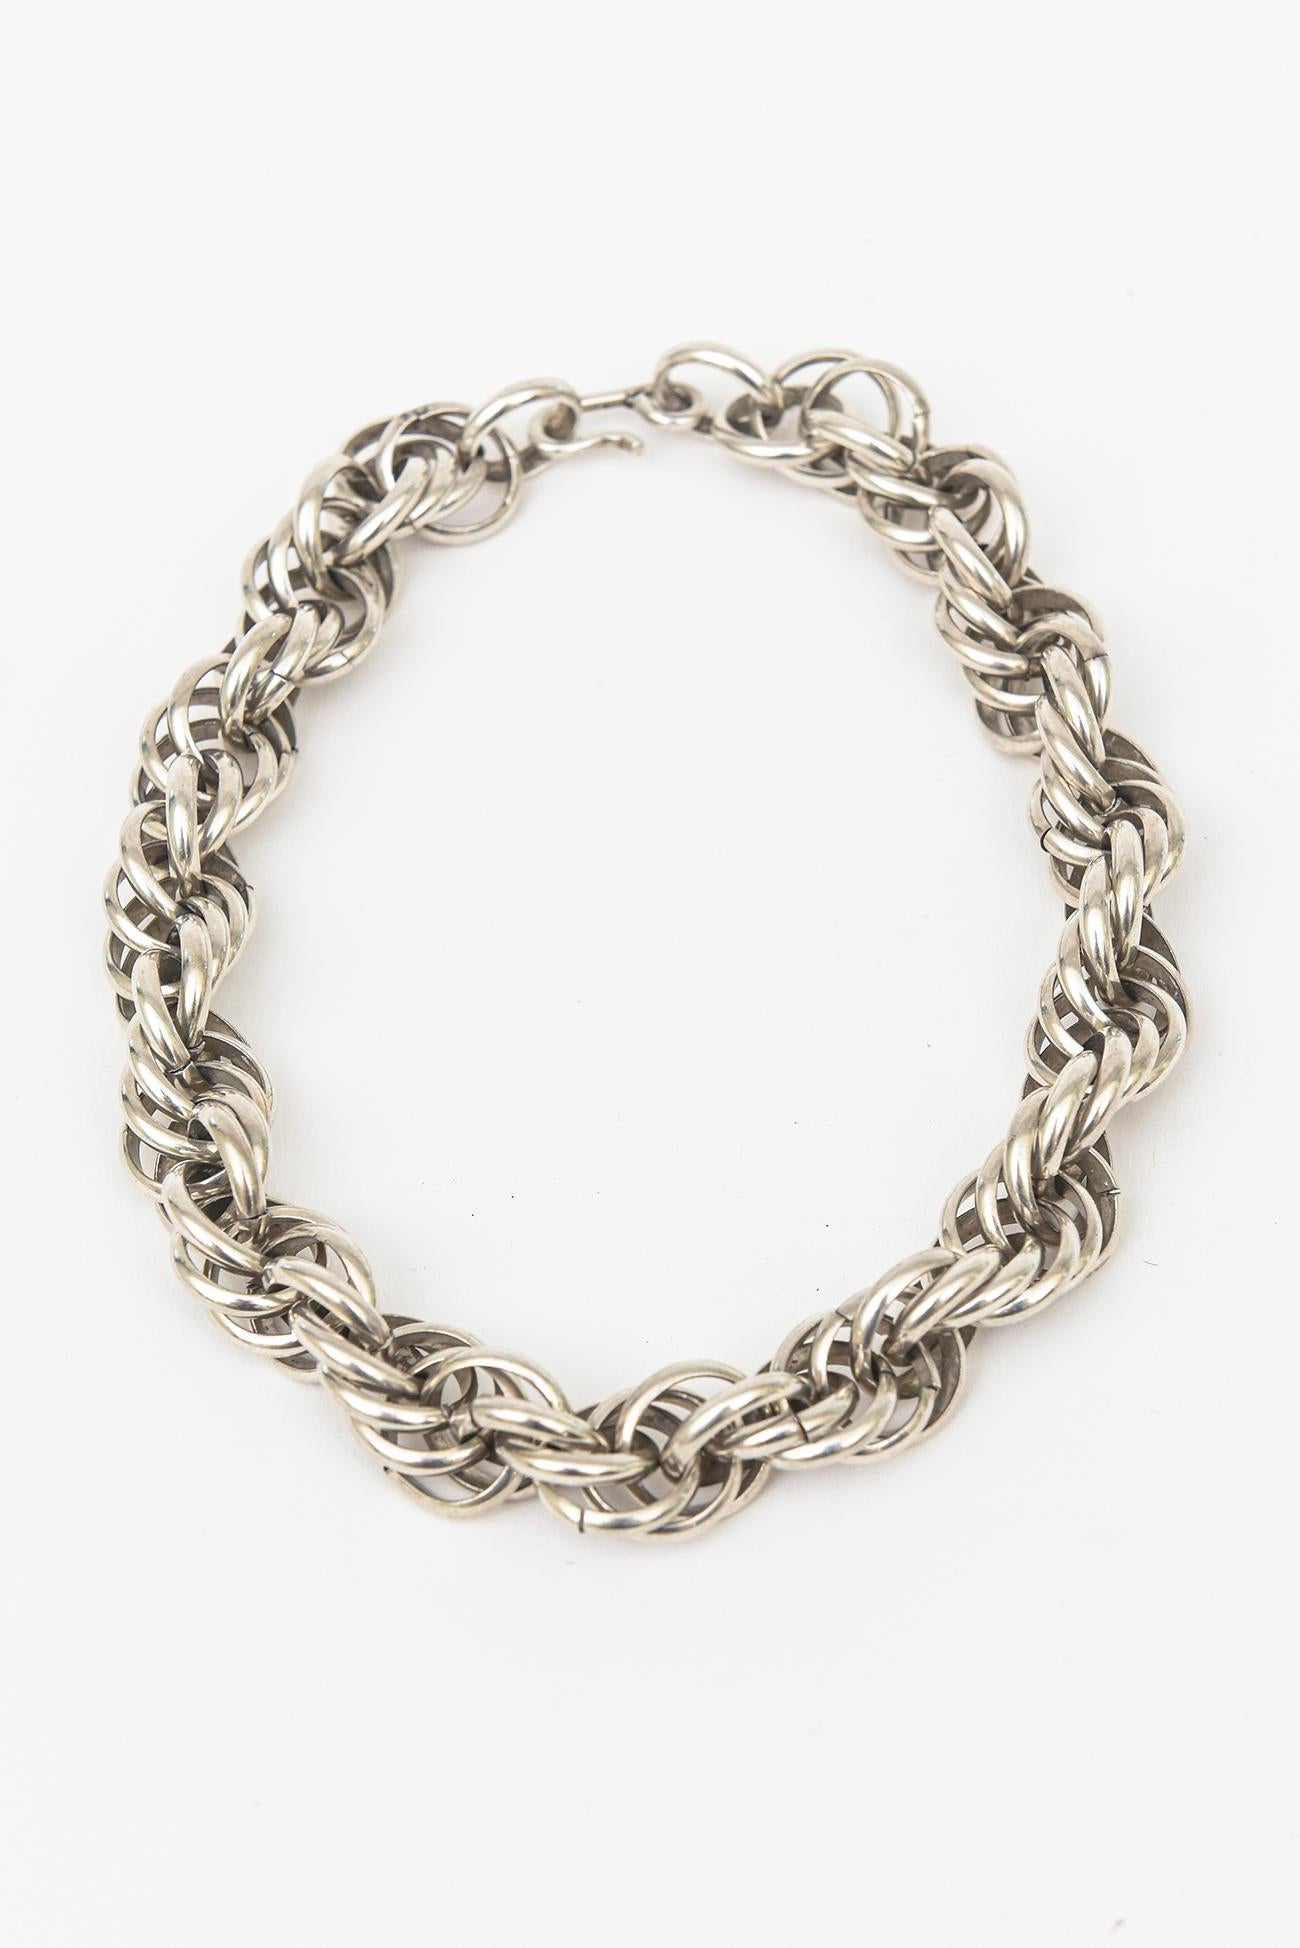 This sterling silver chic Italian twisted link necklace is vintage and hallmarked but not legible. The choker collar necklace is timeless. It says 25T the 9 not visible to show the sterling mark. It has been tested by a jeweler for sterling silver